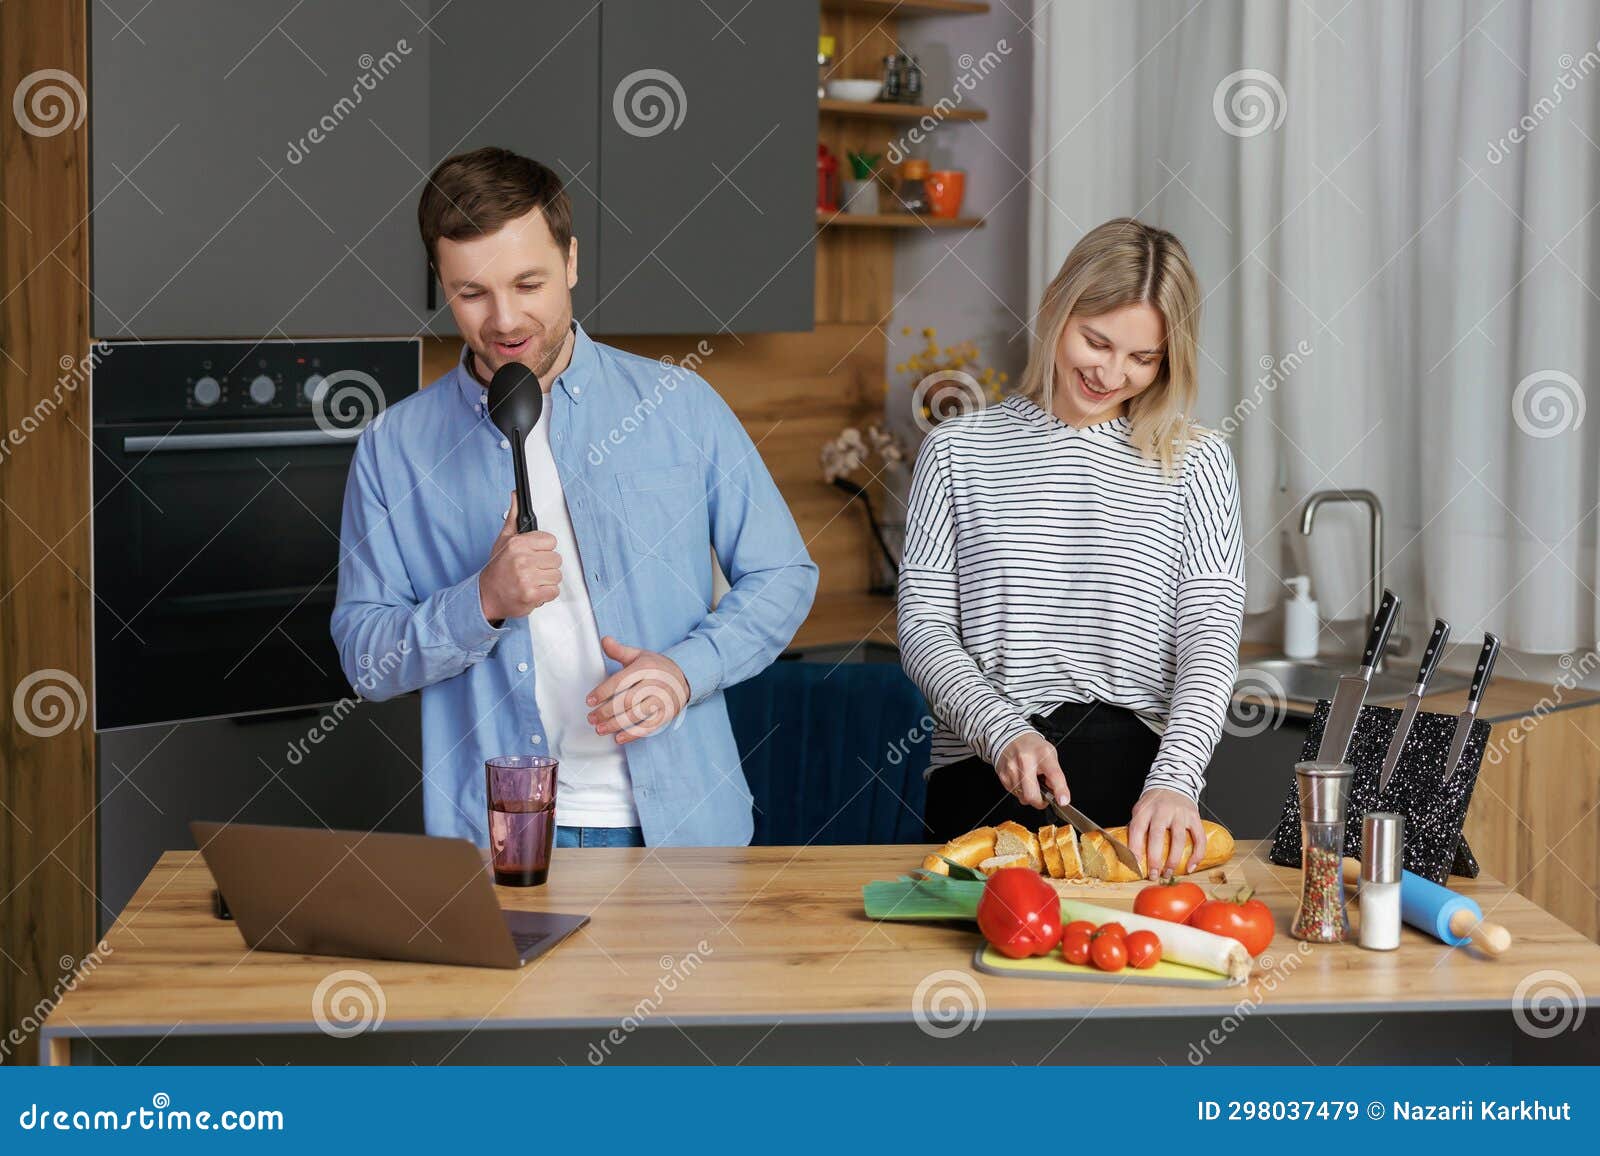 Home Concert Playful Spouses Having Fun In Kitchen Singing And Dancing Stock Image Image Of